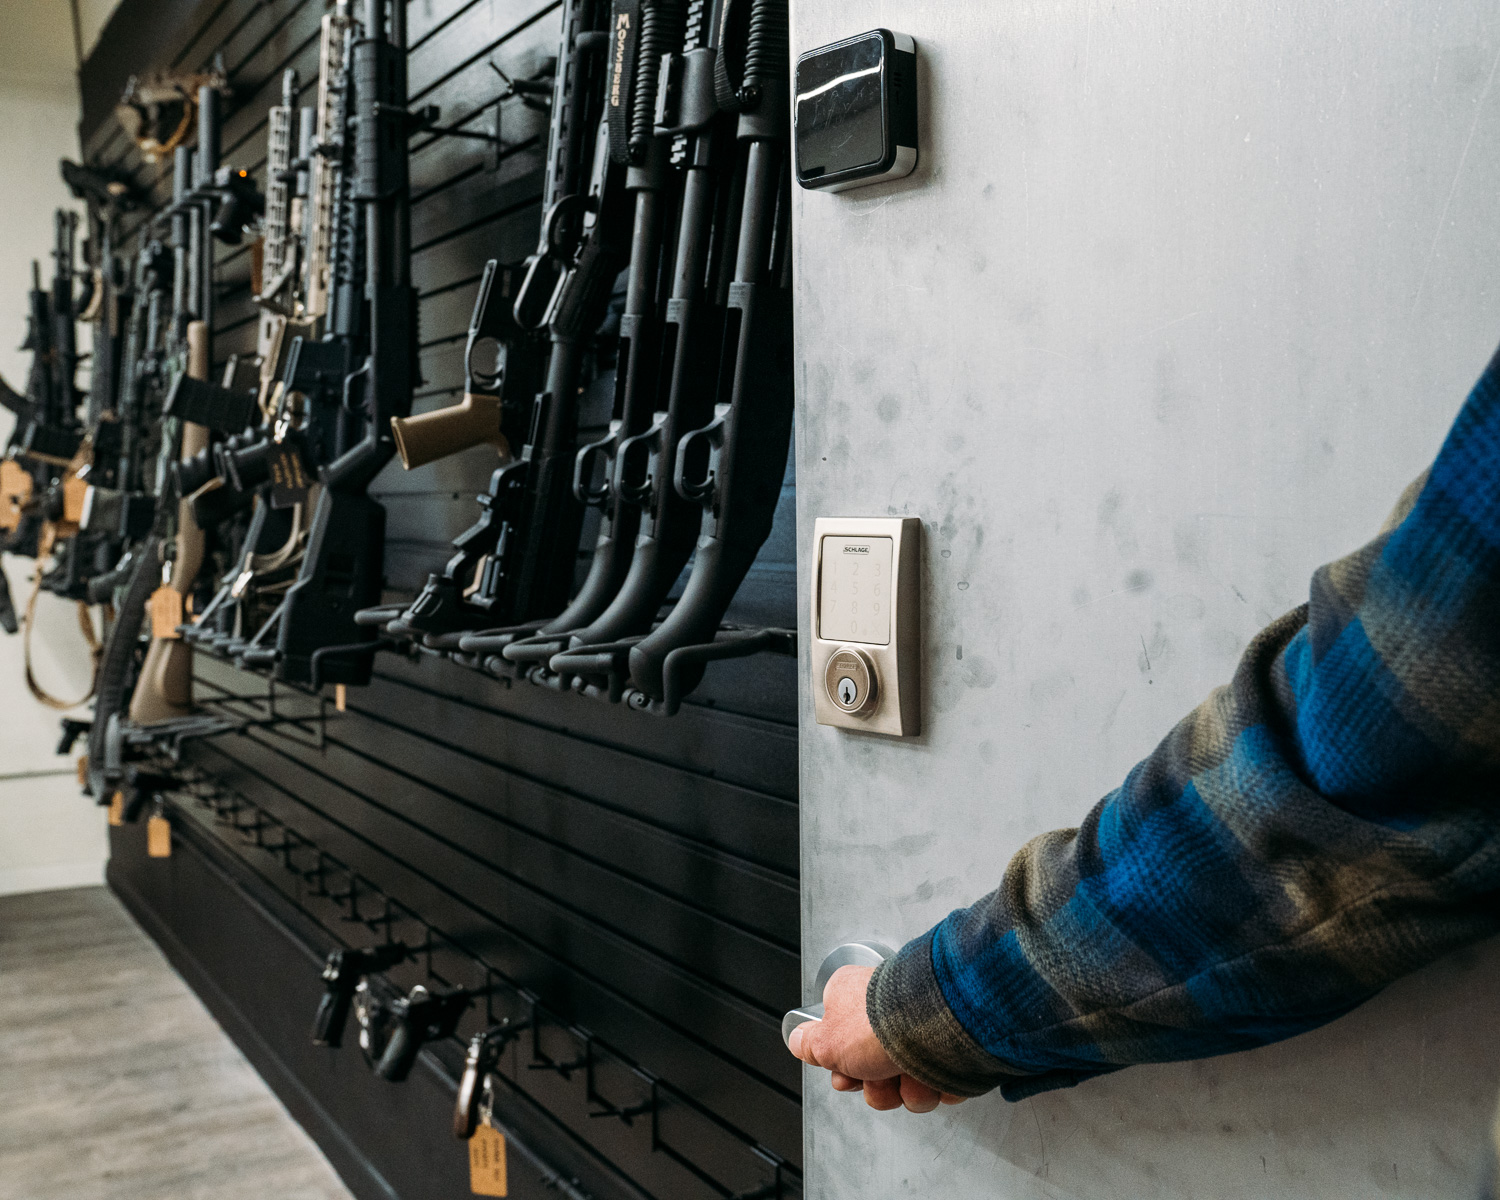 Closet Security: Top 5 Locked Solutions for You